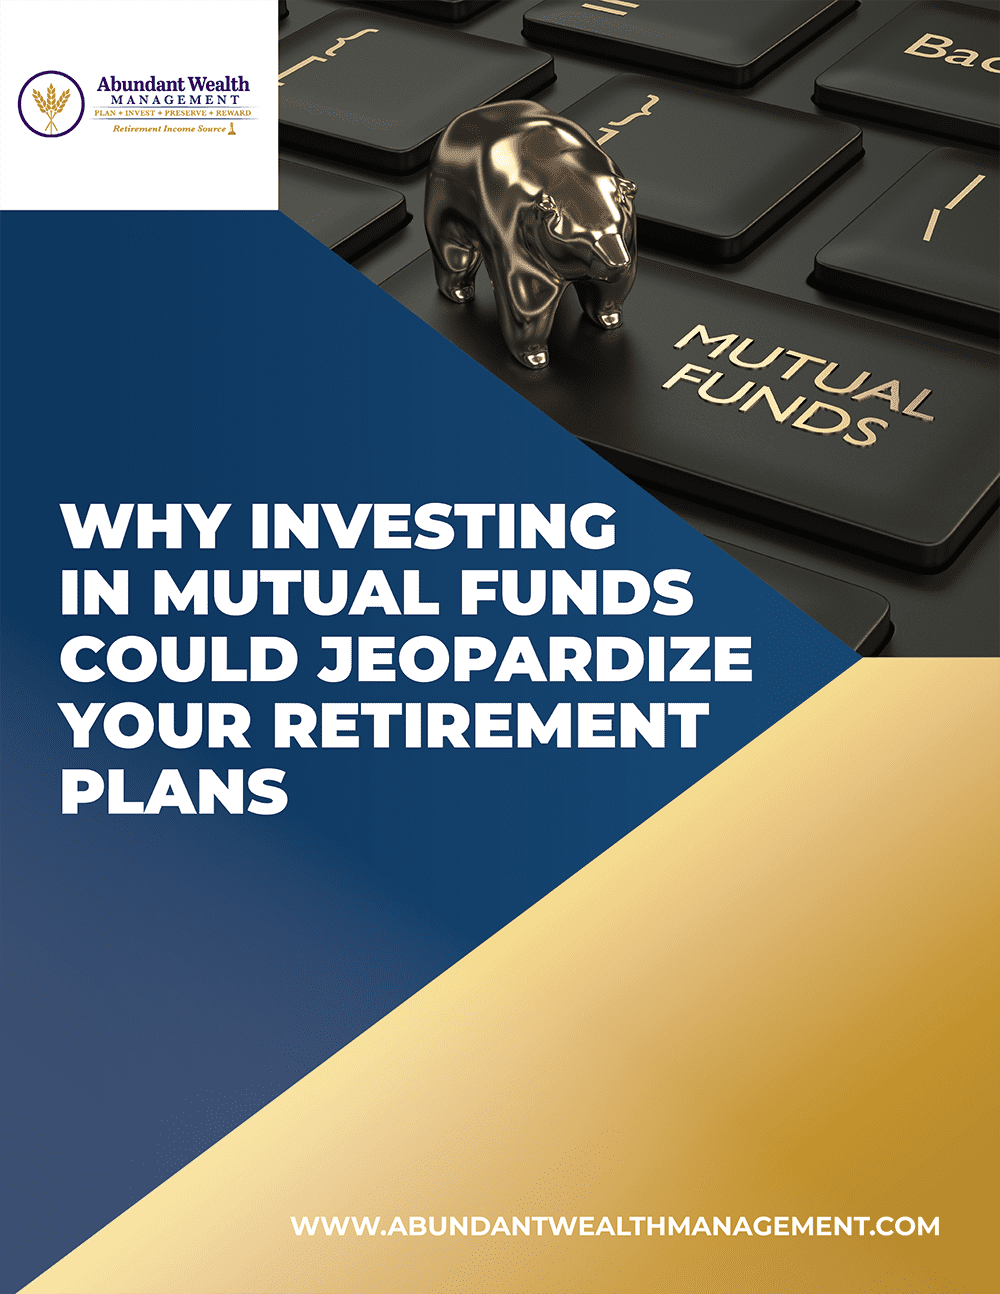 Abundant Wealth Management - Why Investing in Mutual Funds Could Jeopardize Your Retirement Plans-1